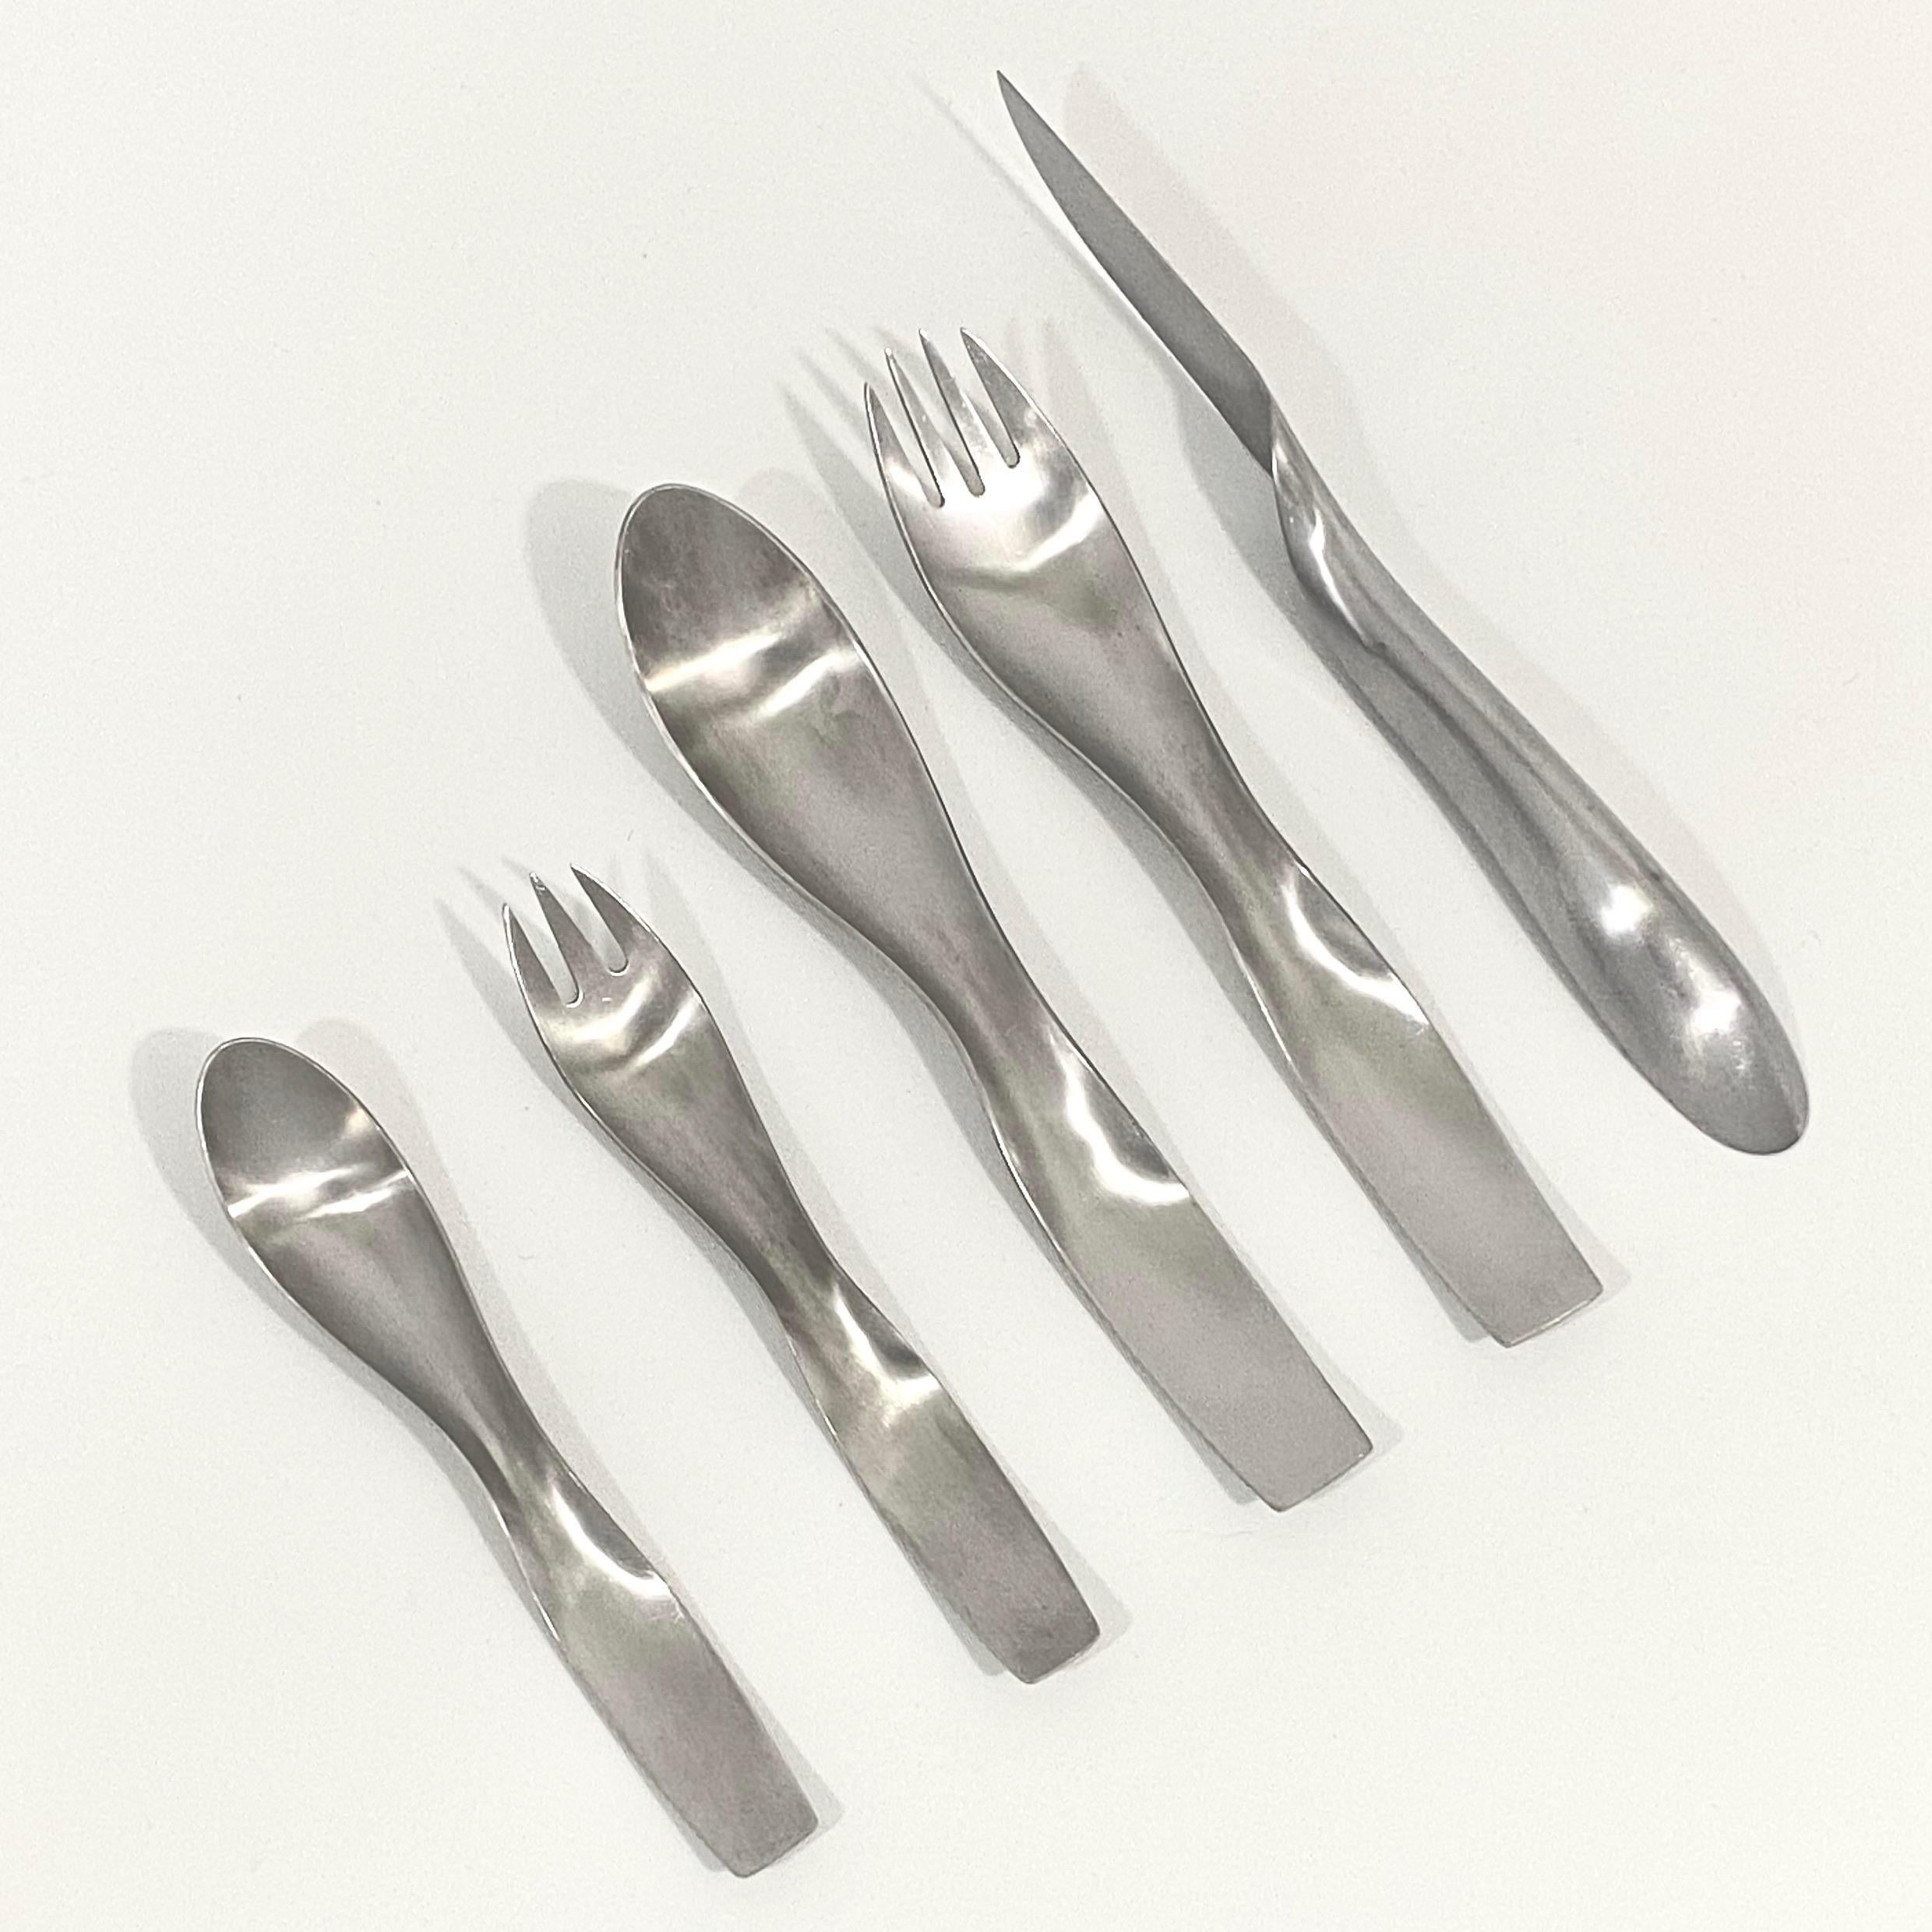 Rare János Megyik for Amboss avant-garde flatware service for 12. Each service includes 5 utensils: dinner fork, salad / dessert fork, dinner / soup spoon, tea spoon and dinner knife. Each utensil is stamped and marked. Great vintage condition with